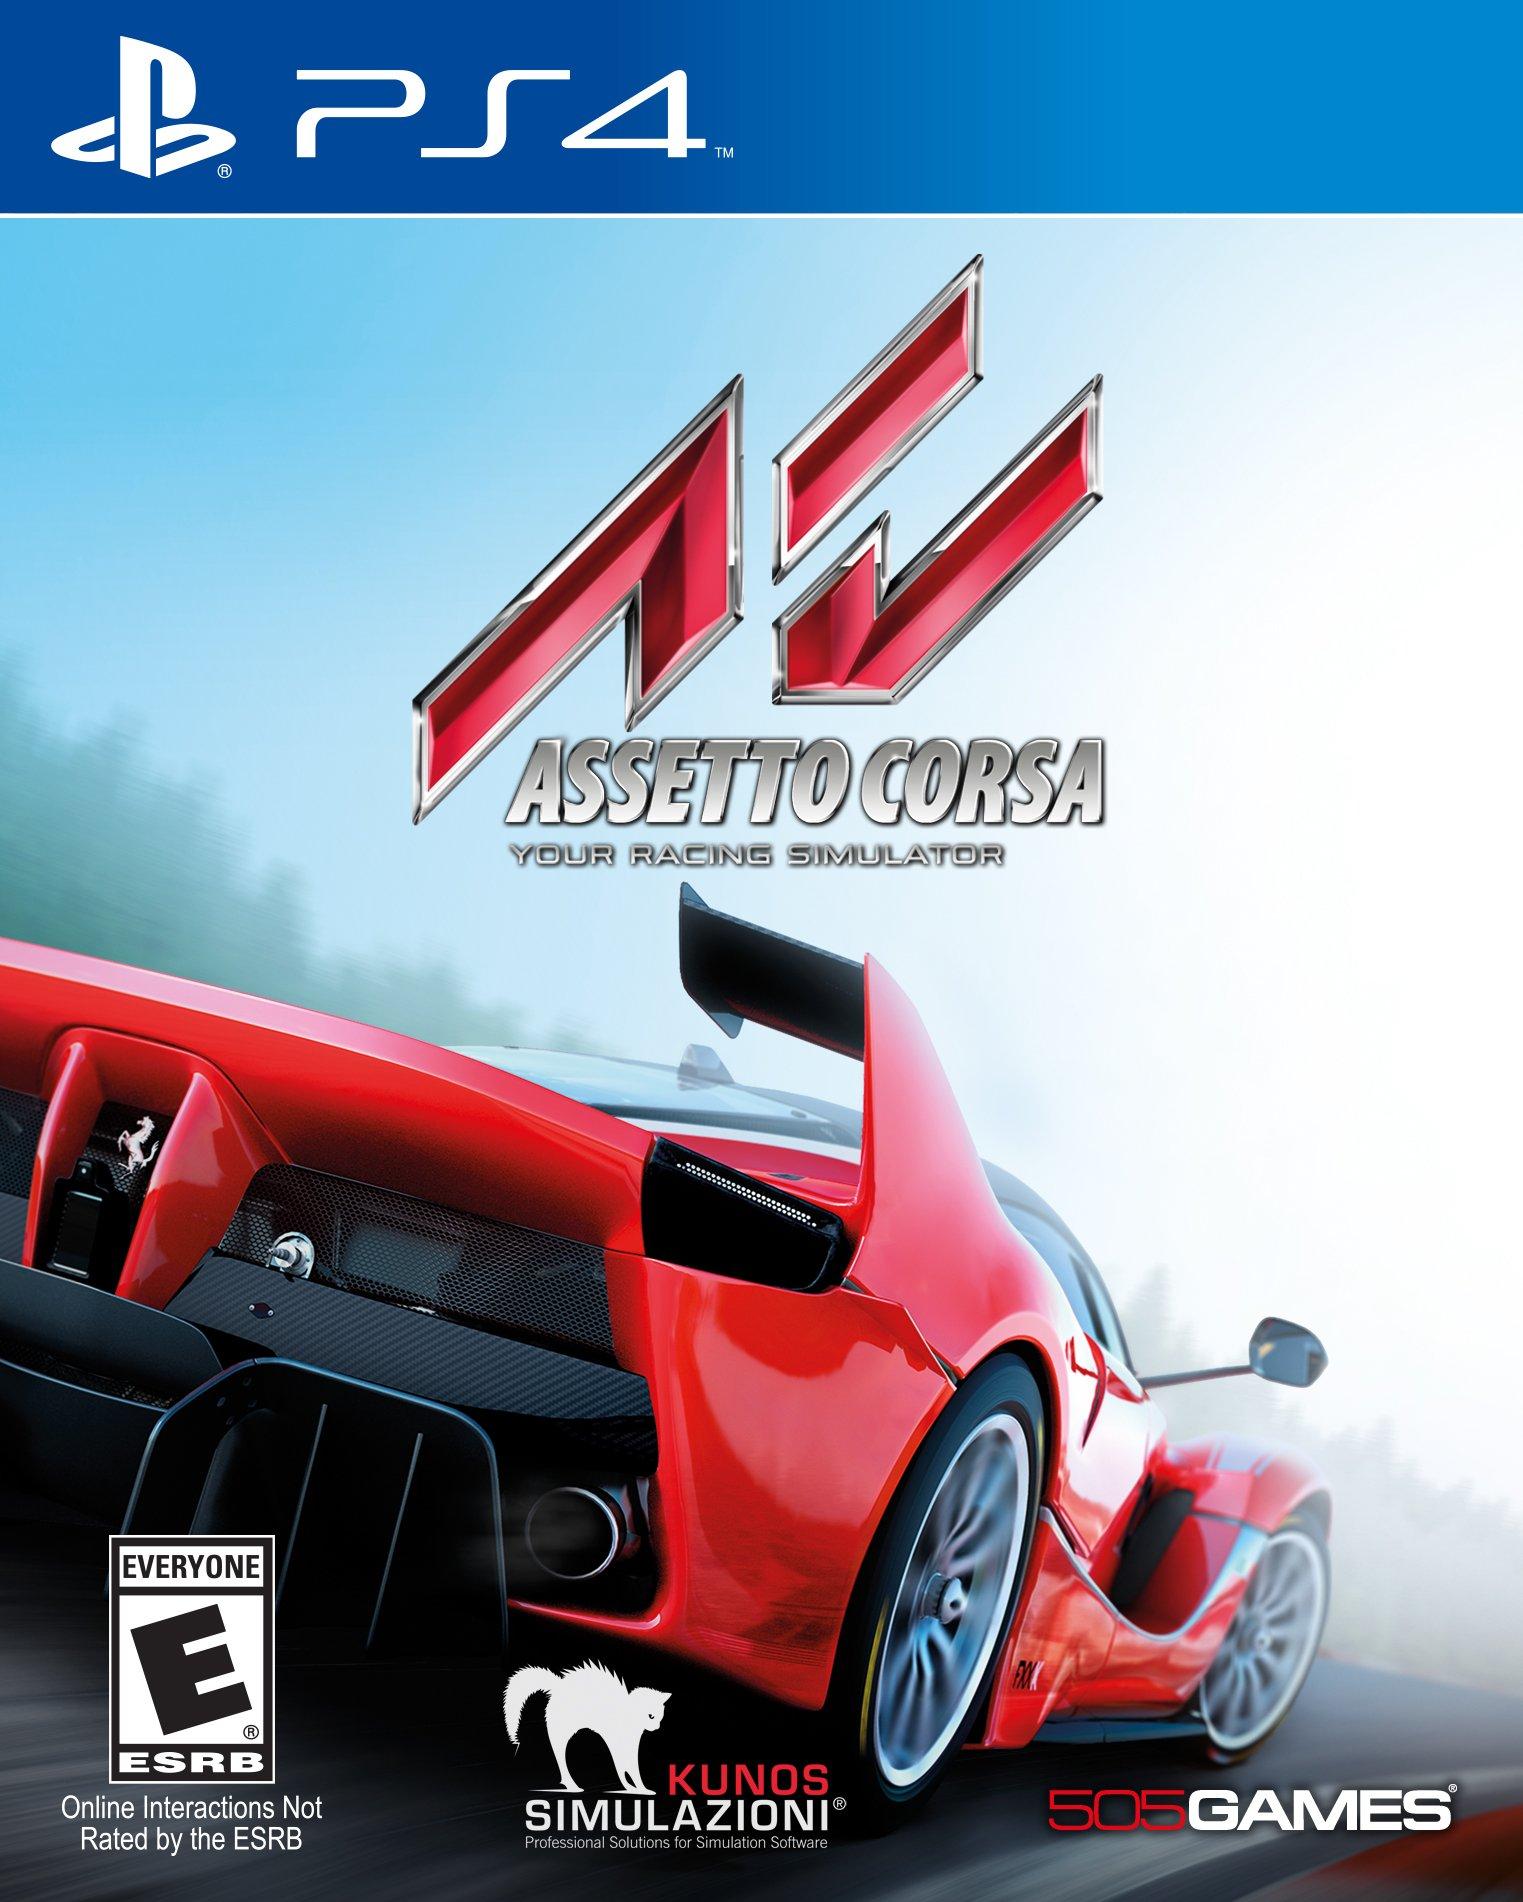 wassup guys assetto in on sale on ps4 , and i wanna ask yall if its worth  it ? is it really like those videos where u cruise on highways with ur